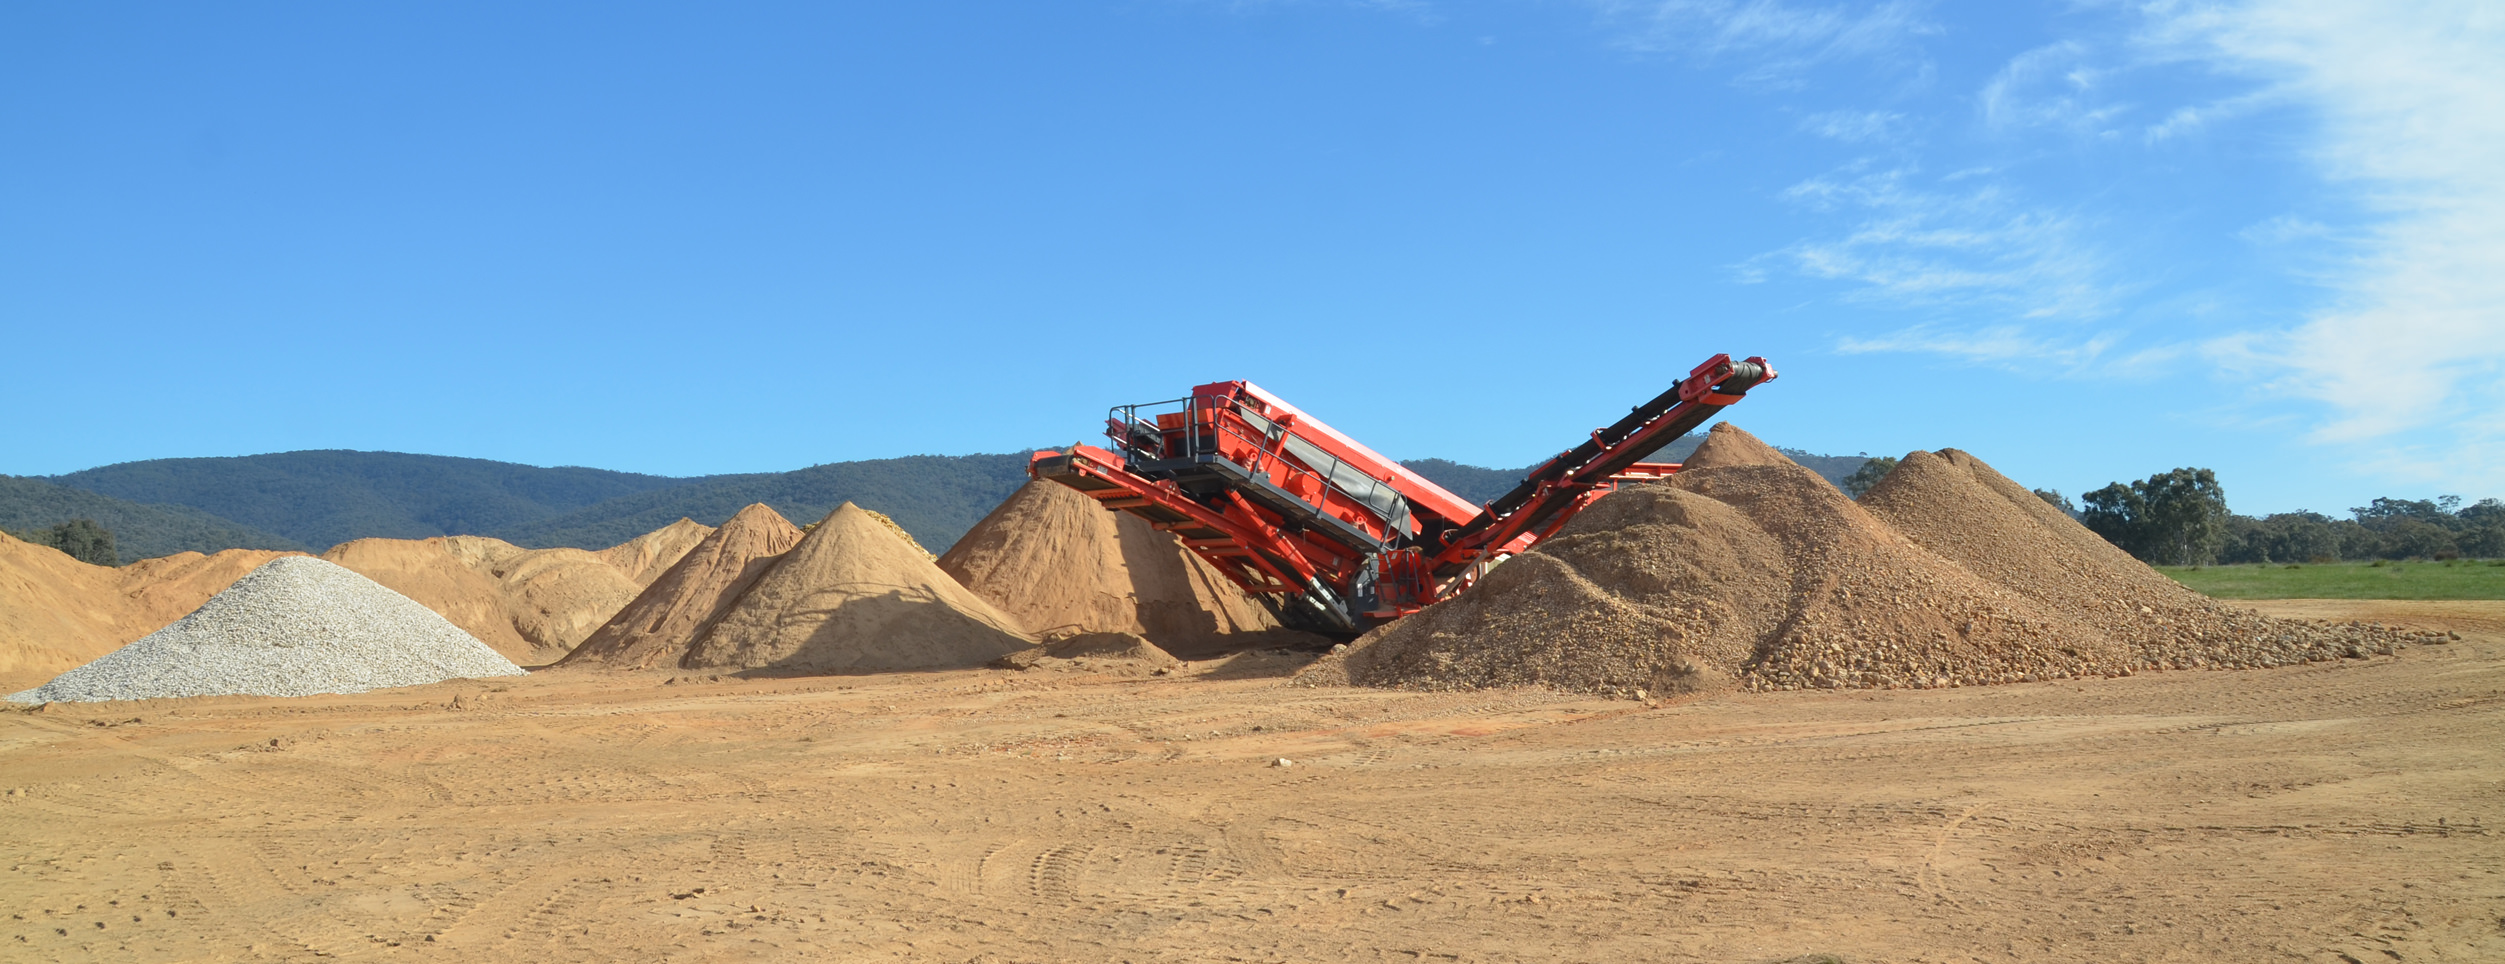 Provider of quality aggregates, sands, gravels and decorative pebbles